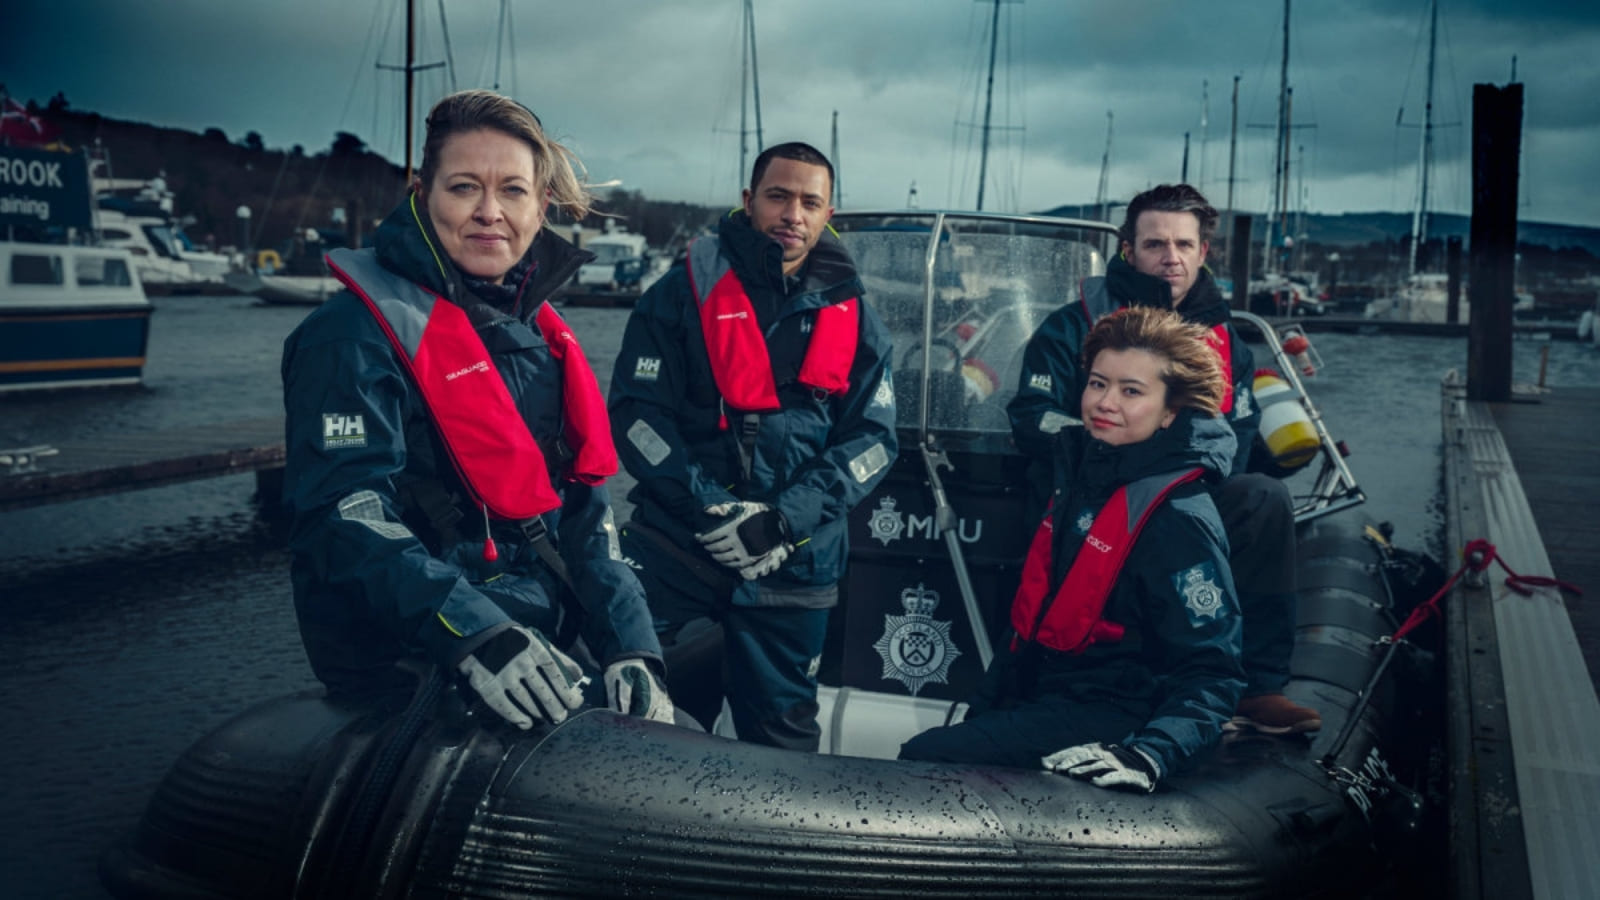 The cast of Annika sit together on a boat under a stormy sky